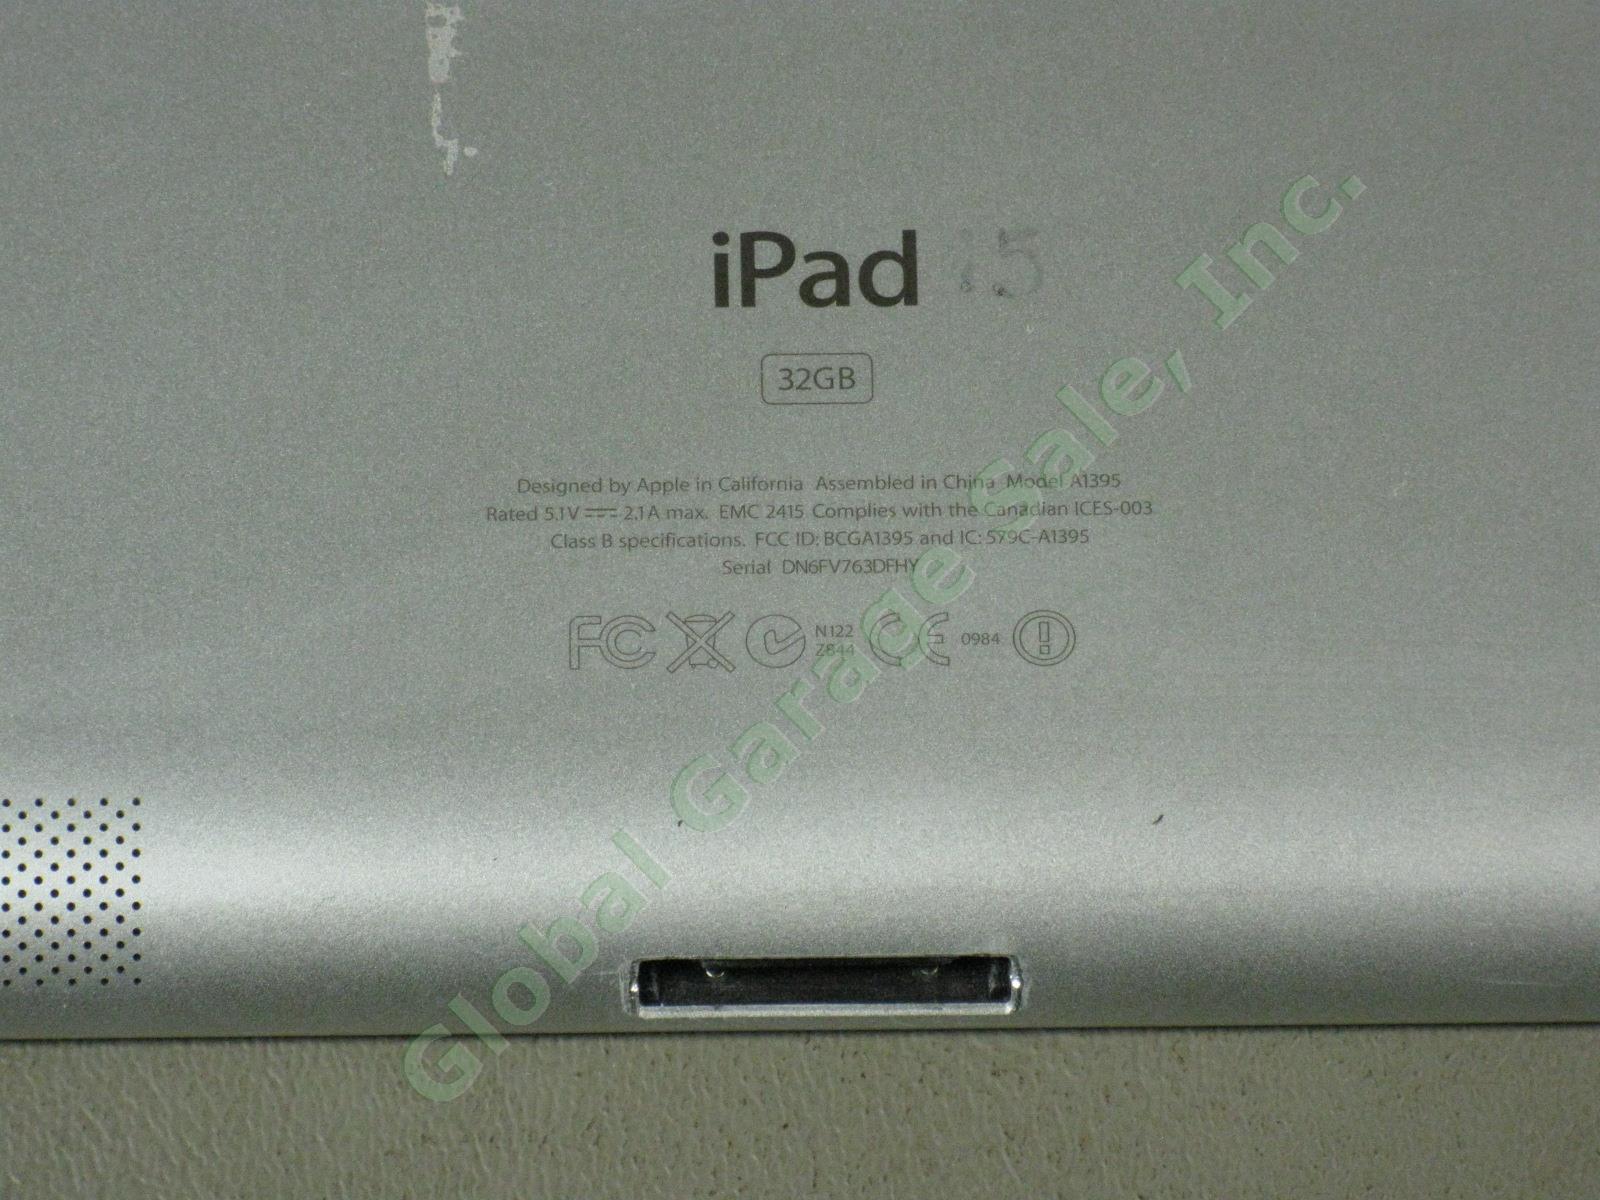 Apple iPad 2 Wifi 32GB Tablet Factory Reset Works Great Cracked Screen A1395 NR! 4